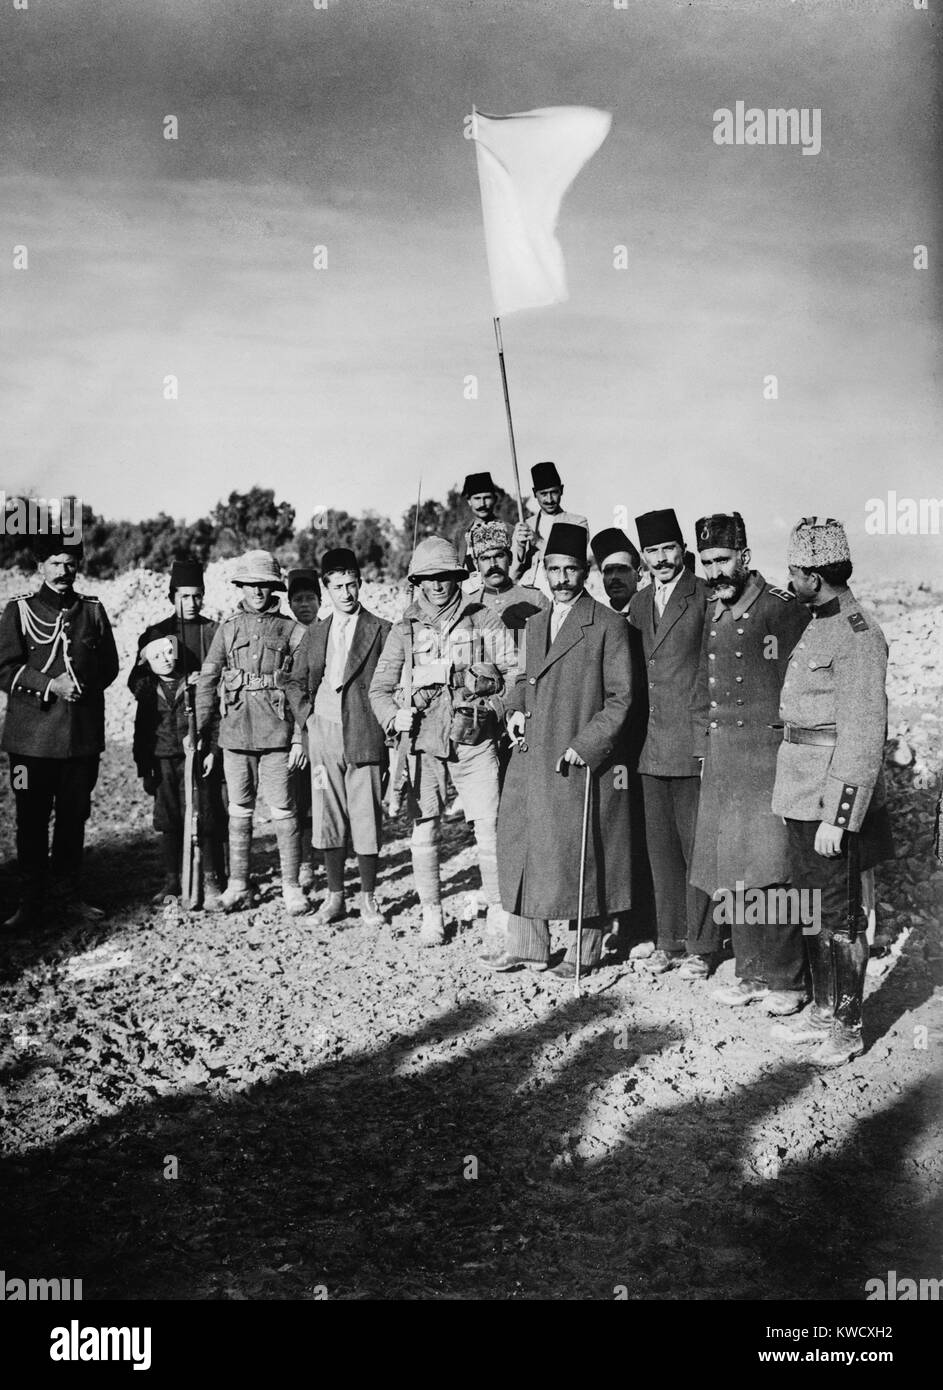 World War 1 in the Middle East. The surrender of Jerusalem to the British. The Mayor of Jerusalem, Hussein Salim al-Husseini (holding cane), with white flag, offers surrender to British Sergeants James Sedgewick and Frederick Hurcomb of 2/19th Battalion, London Regiment. Dec. 9, 1917. (BSLOC 2013 1 70) Stock Photo